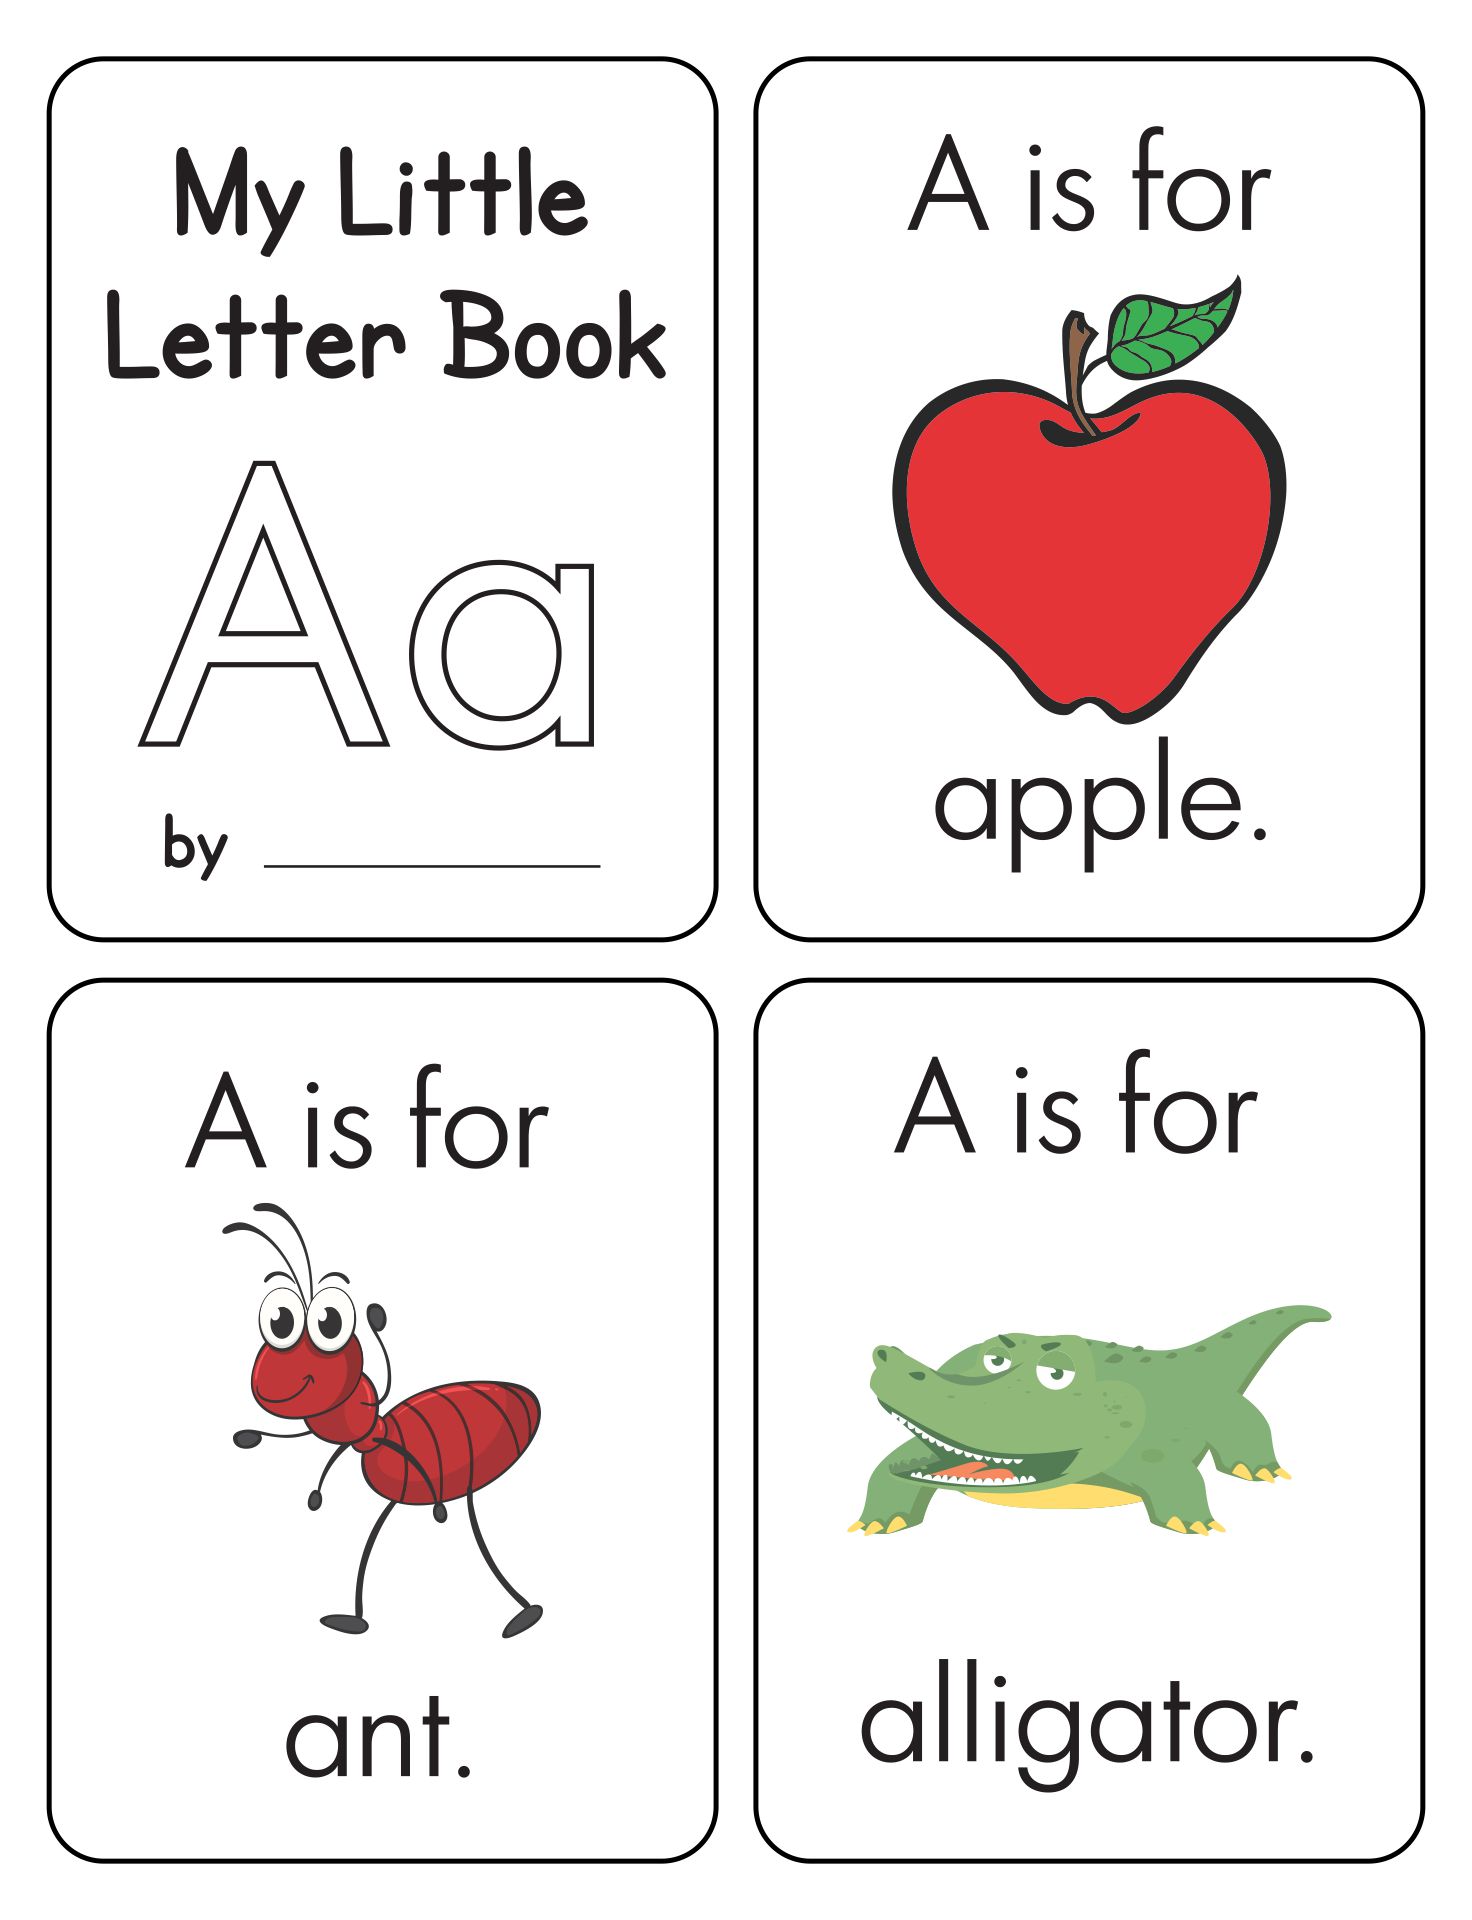 5-best-images-of-a-to-z-printable-books-reading-sight-words-printable-books-my-shape-book